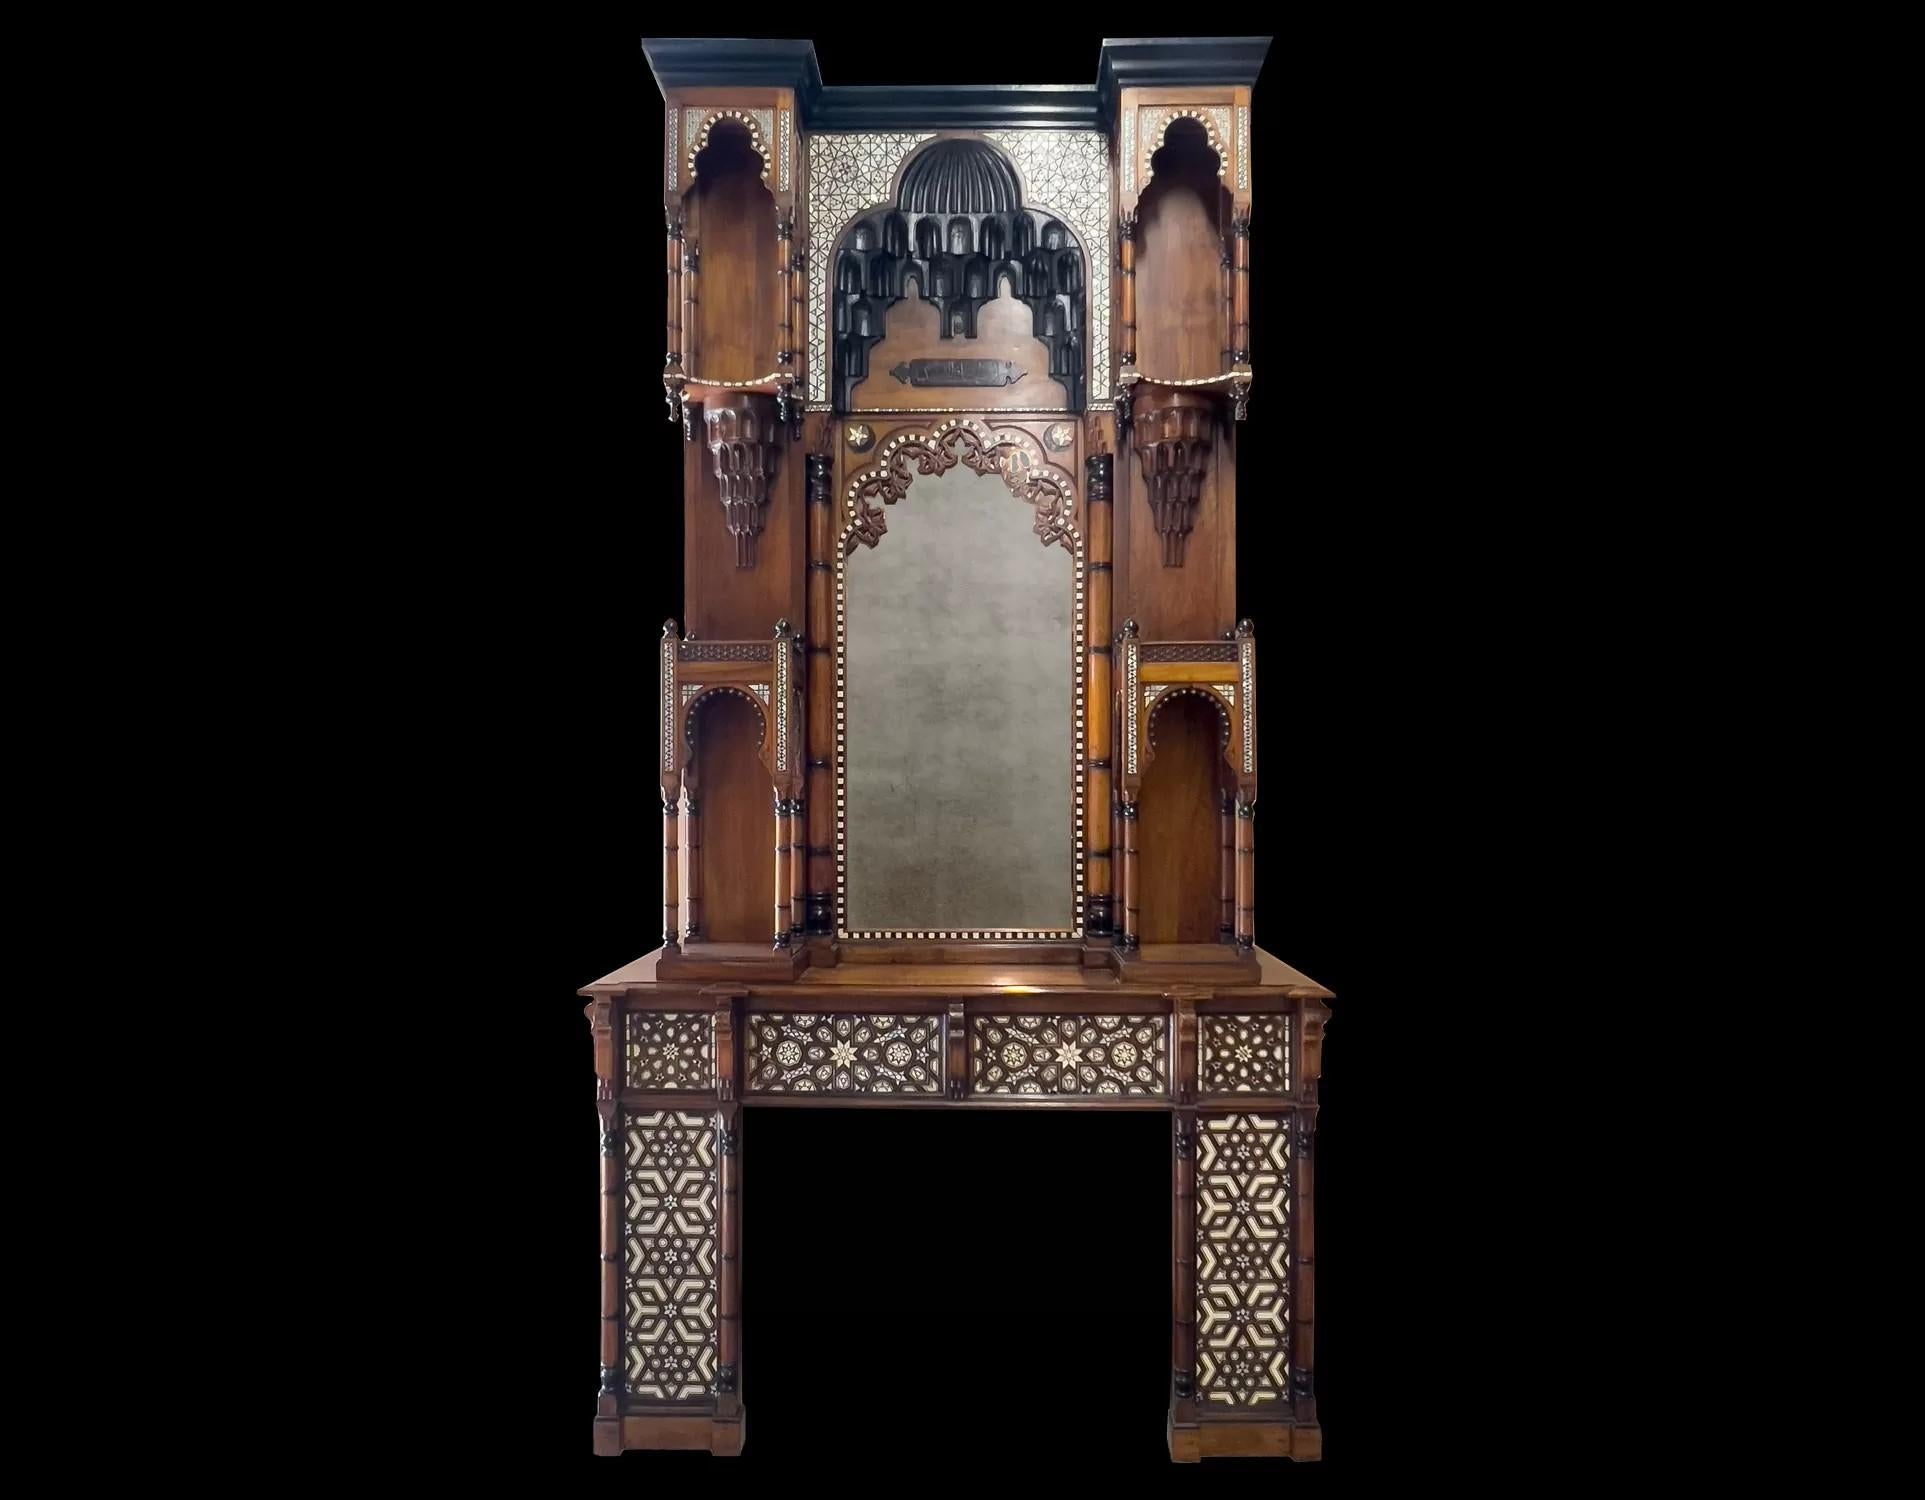 A large antique Moorish revival style walnut fireplace with ebony and mother of pearl inlays.
This extremely rare Moorish style Moroccan fireplace, dating back to the year 1900 features intricate geometric mother of pearl and ebony inlays, horseshoe